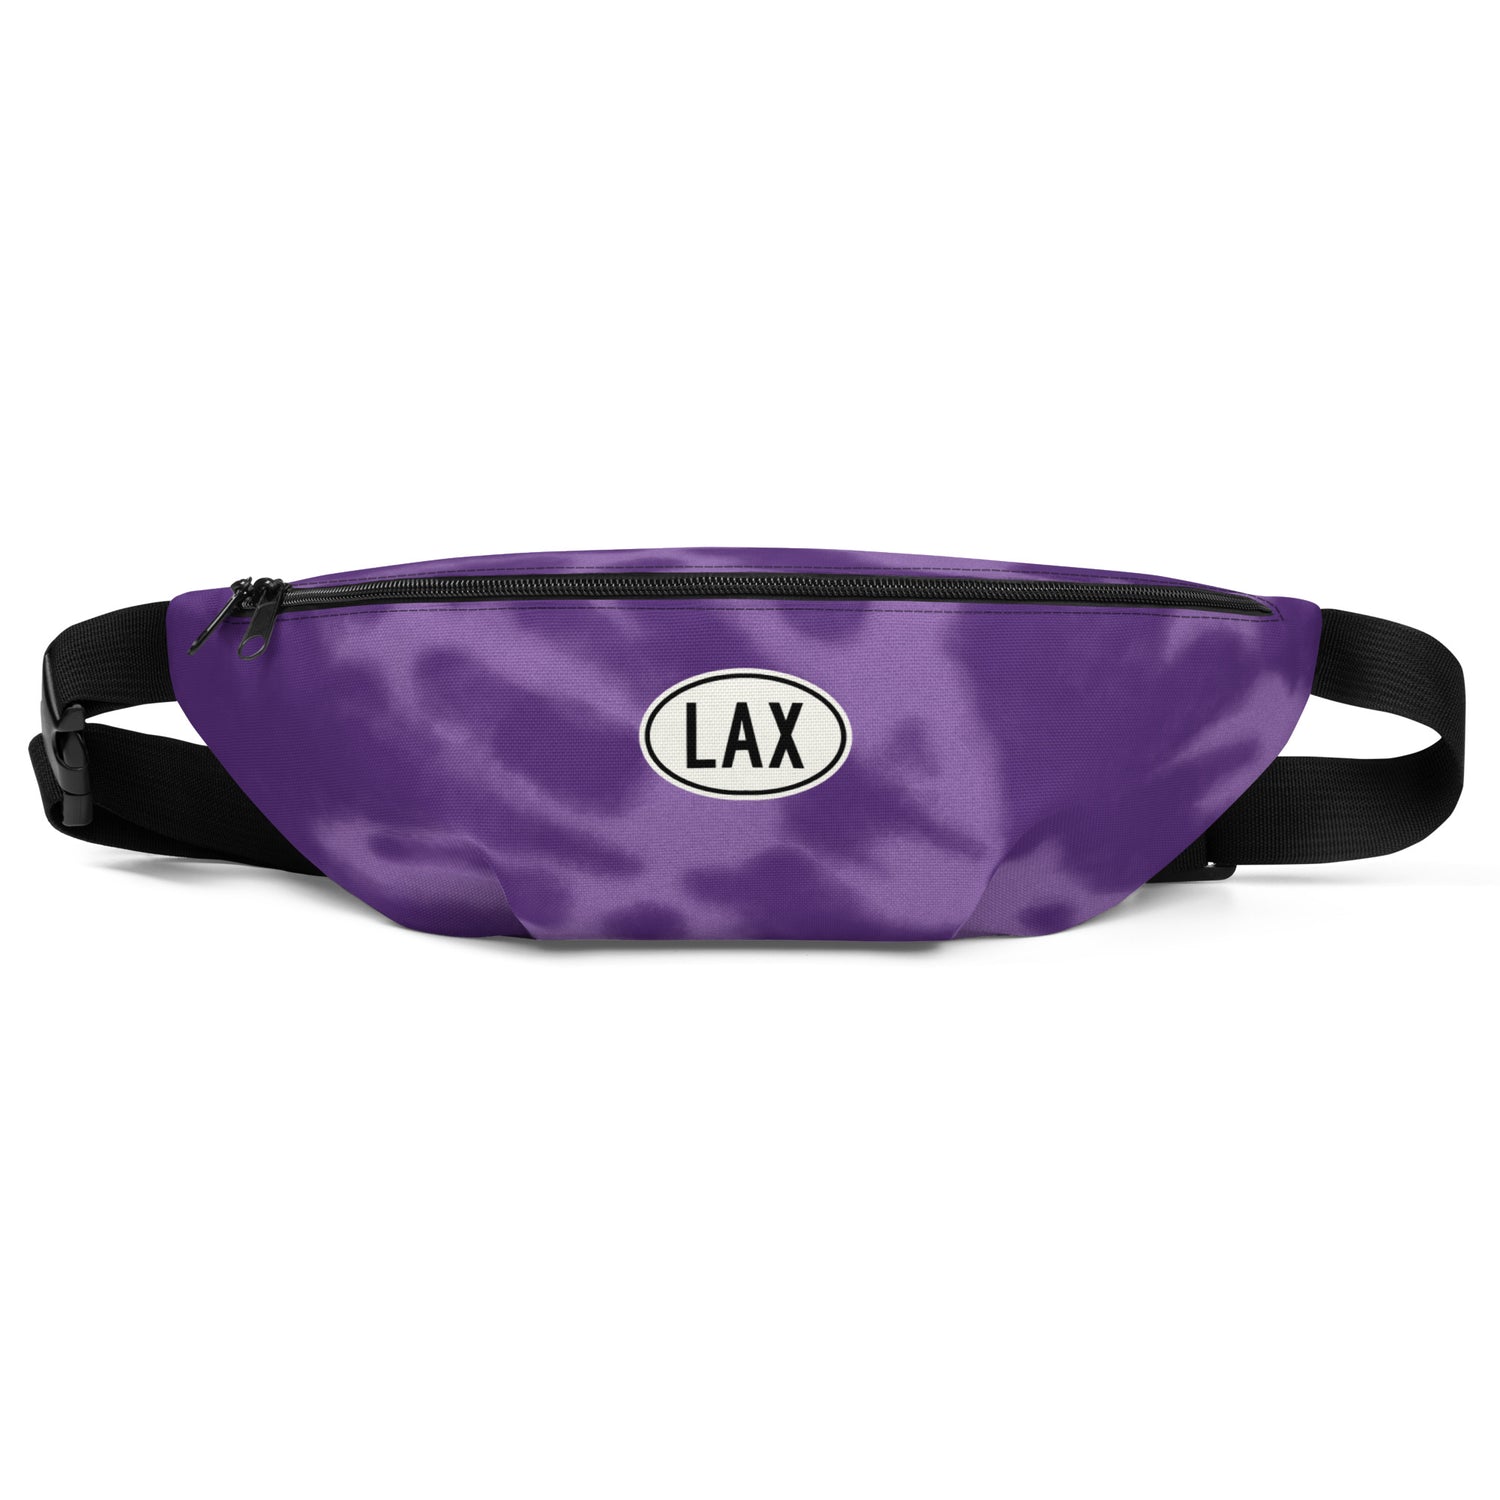 Los Angeles California Backpacks, Fanny Packs and Tote Bags • LAX Airport Code